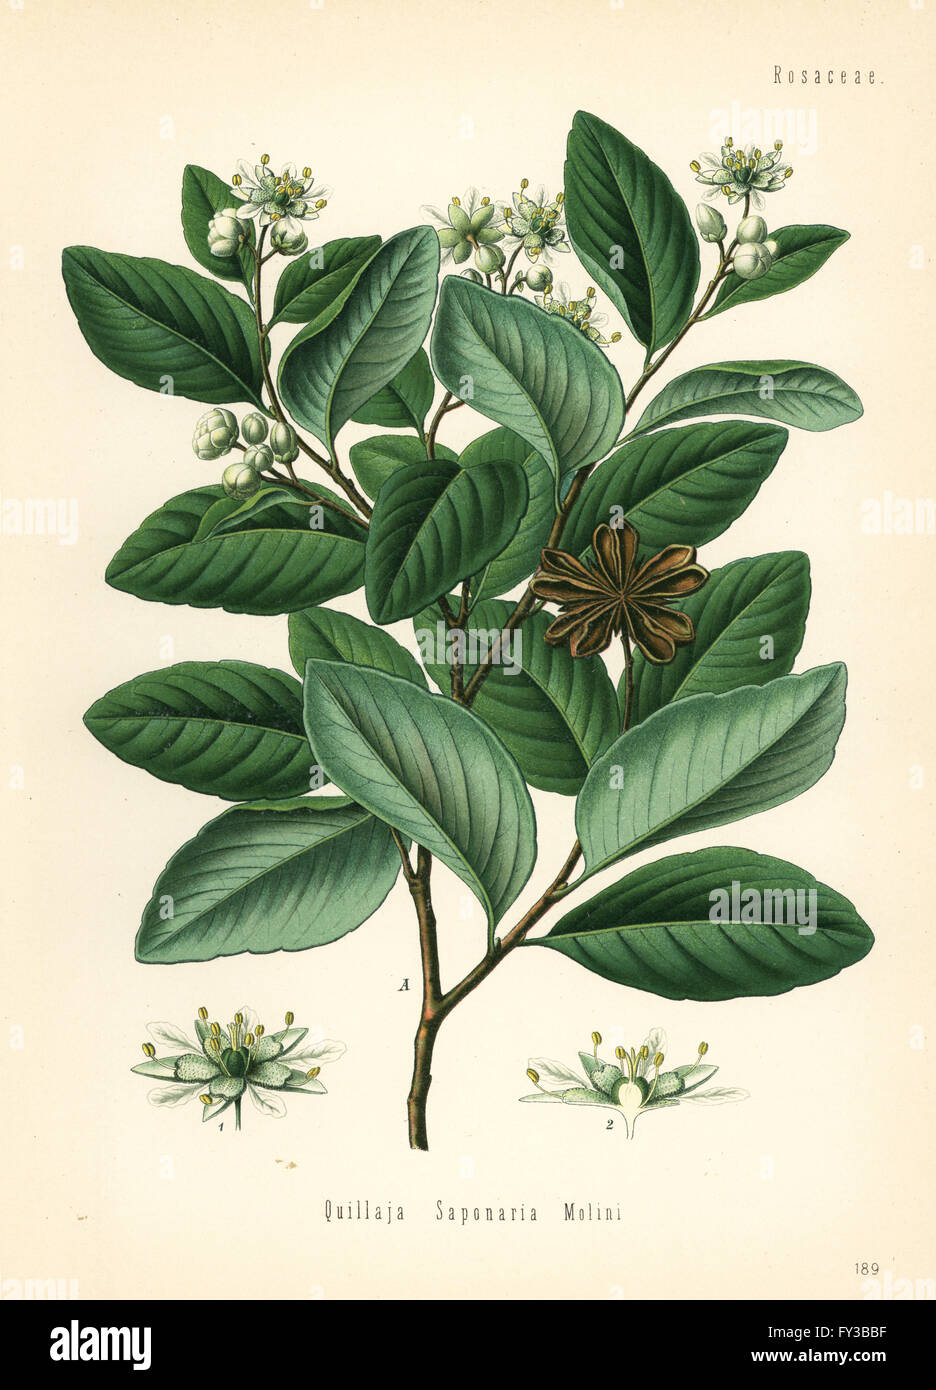 Soap bark tree or soapbark, Quillaja saponaria. Chromolithograph after a botanical illustration from Hermann Adolph Koehler's Medicinal Plants, edited by Gustav Pabst, Koehler, Germany, 1887. Stock Photo